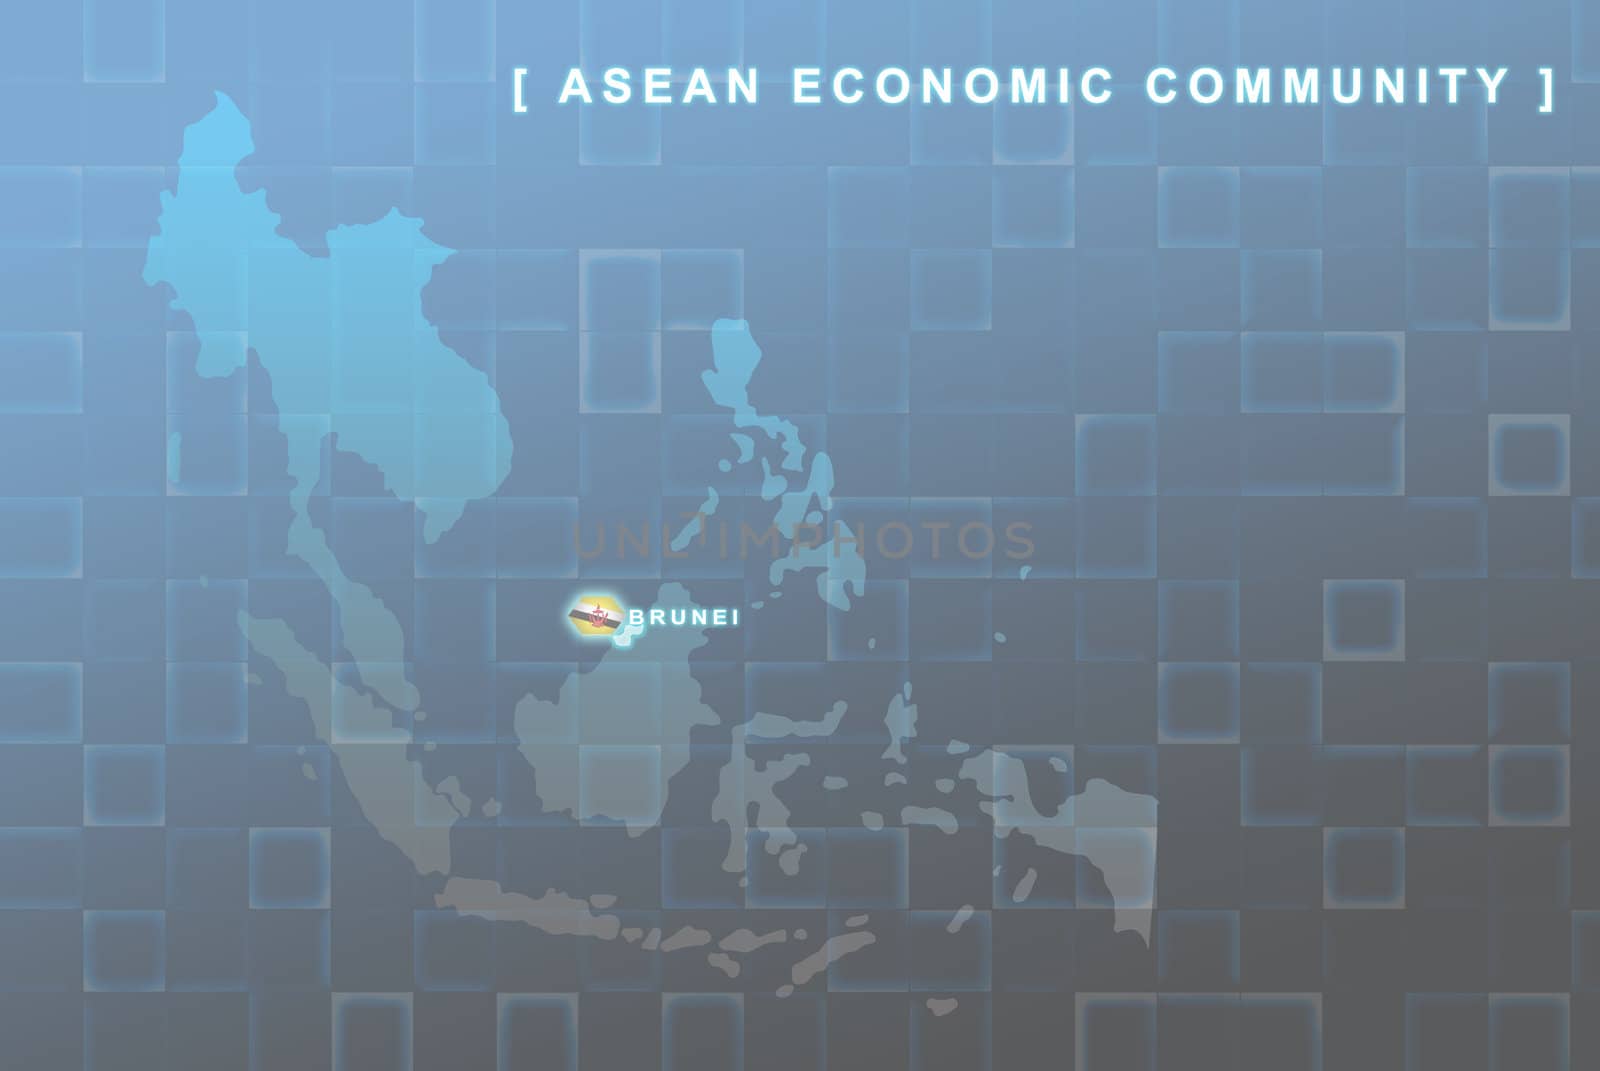 Modern map of South East Asia countries that will be member of AEC with Brunei flag symbol in background